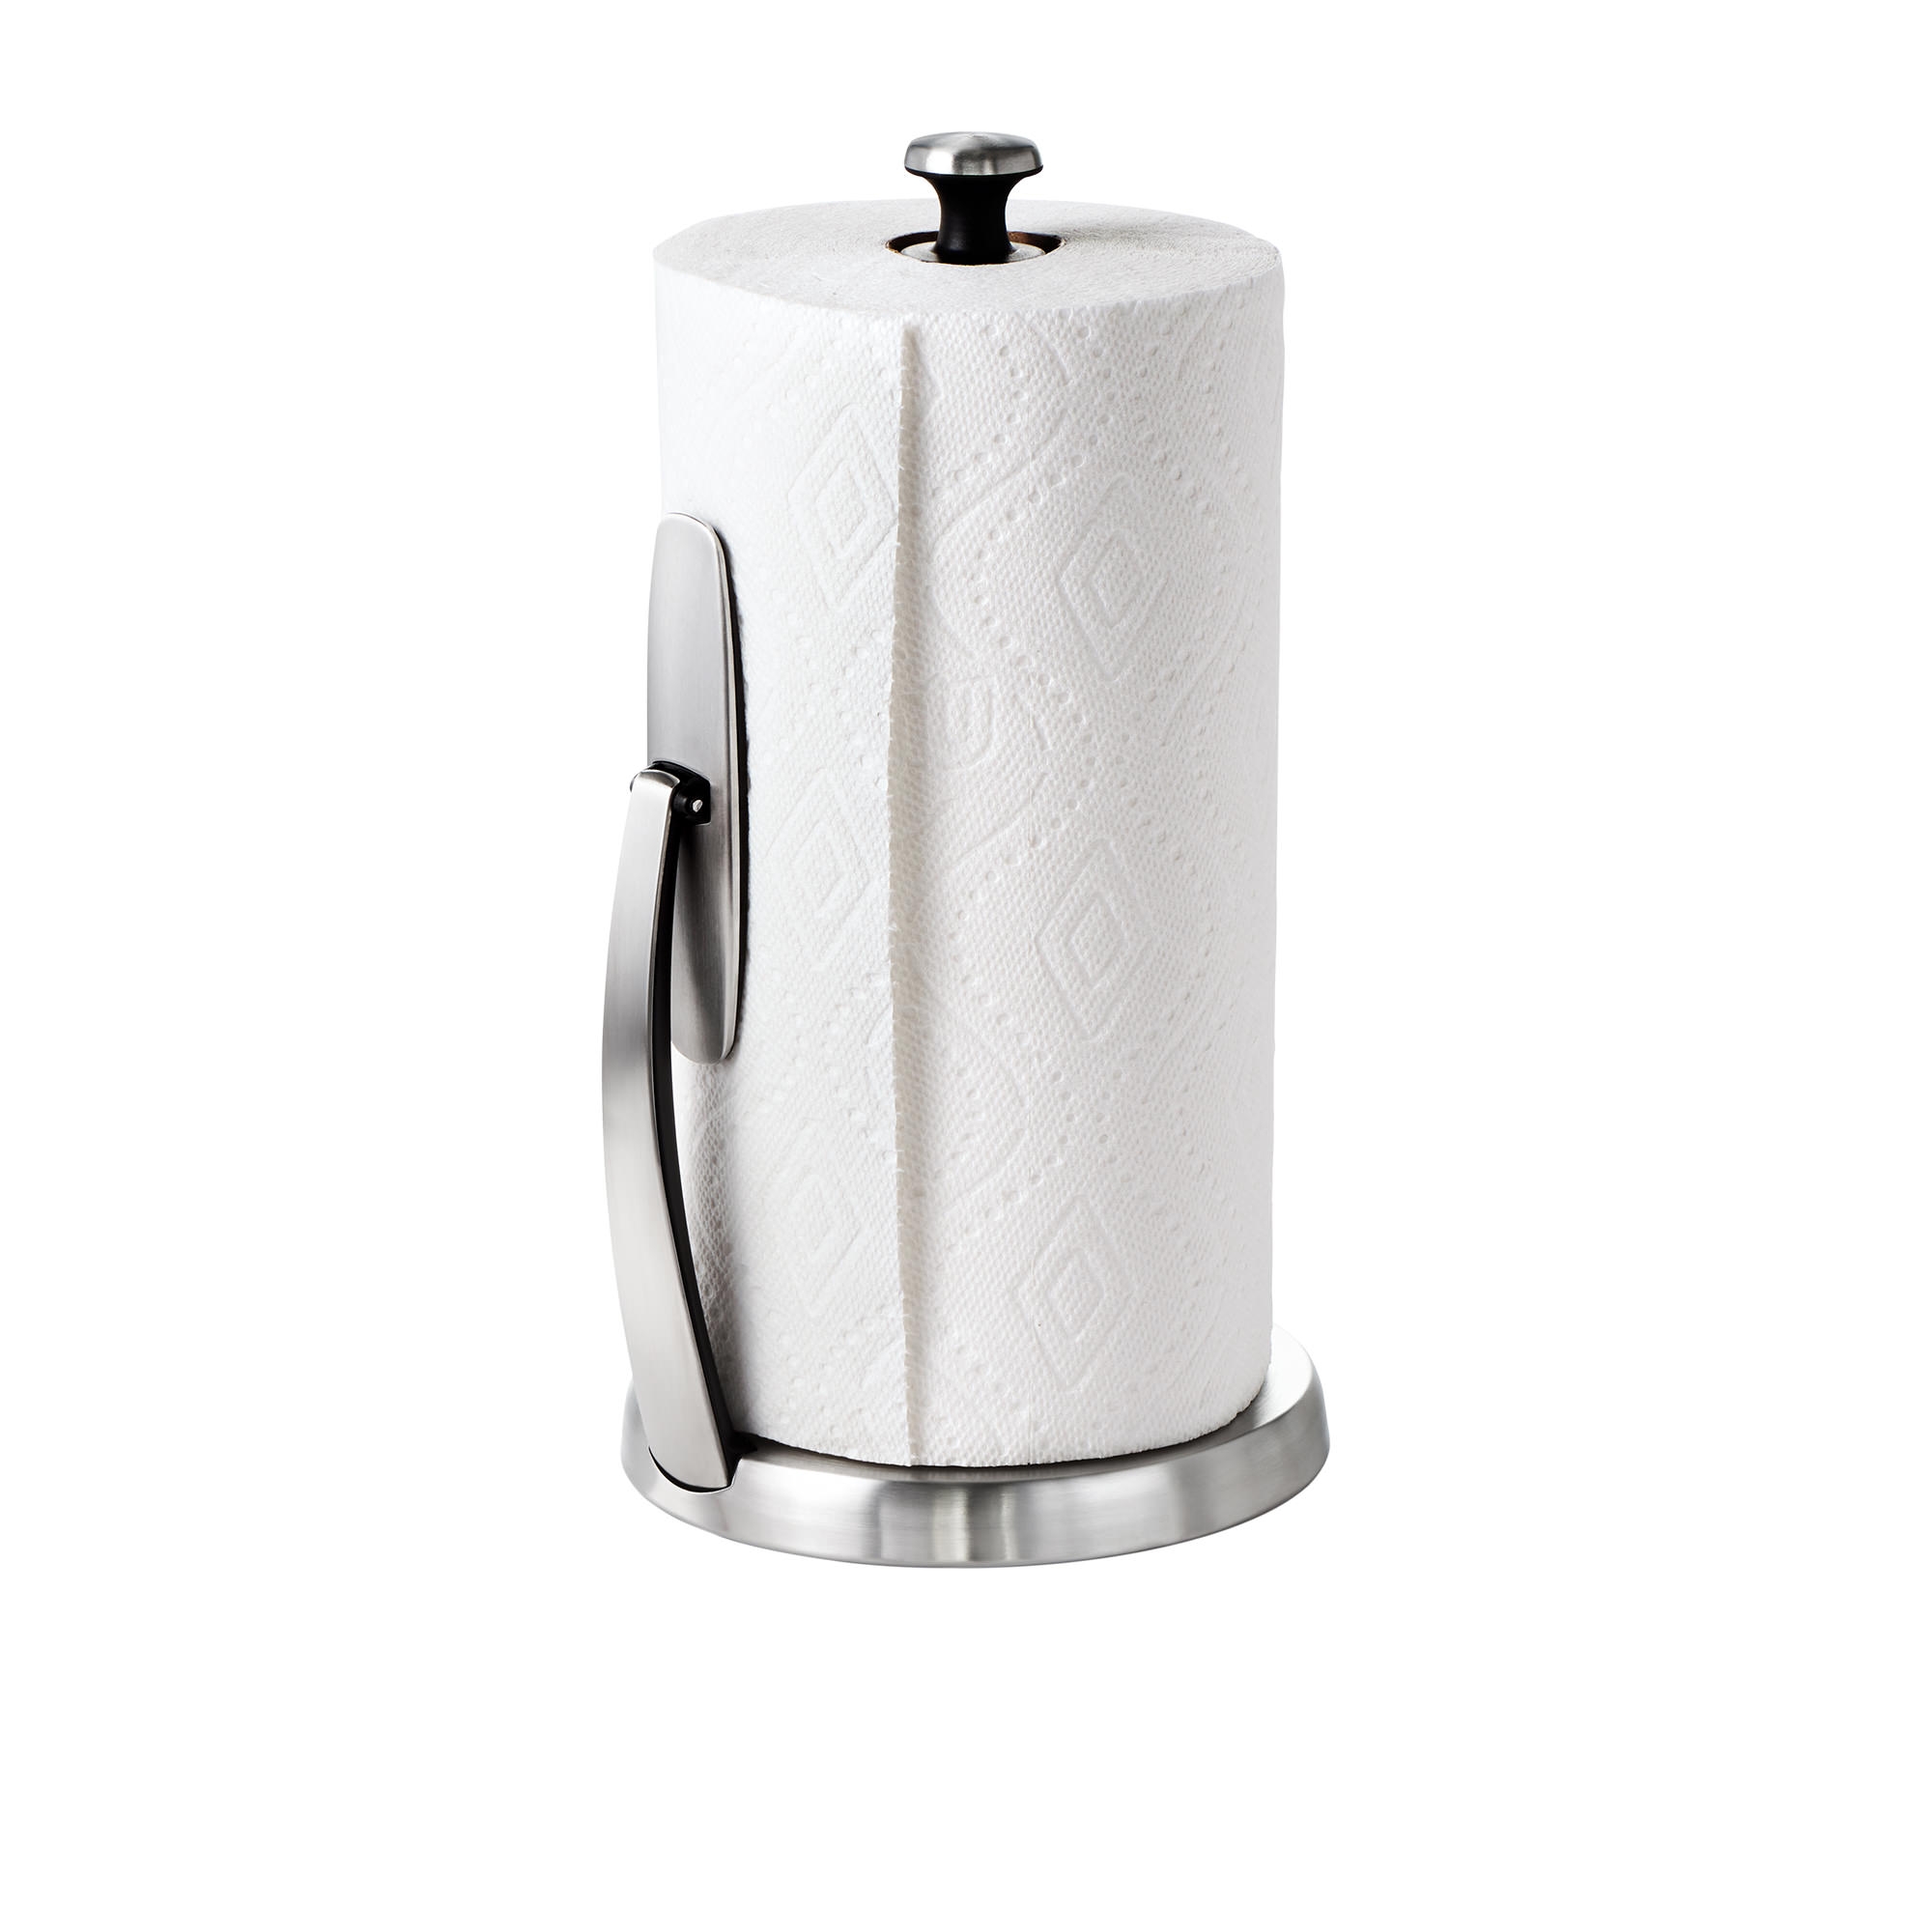 OXO Good Grips SimplyTear Paper Towel Holder Stainless Steel Image 2